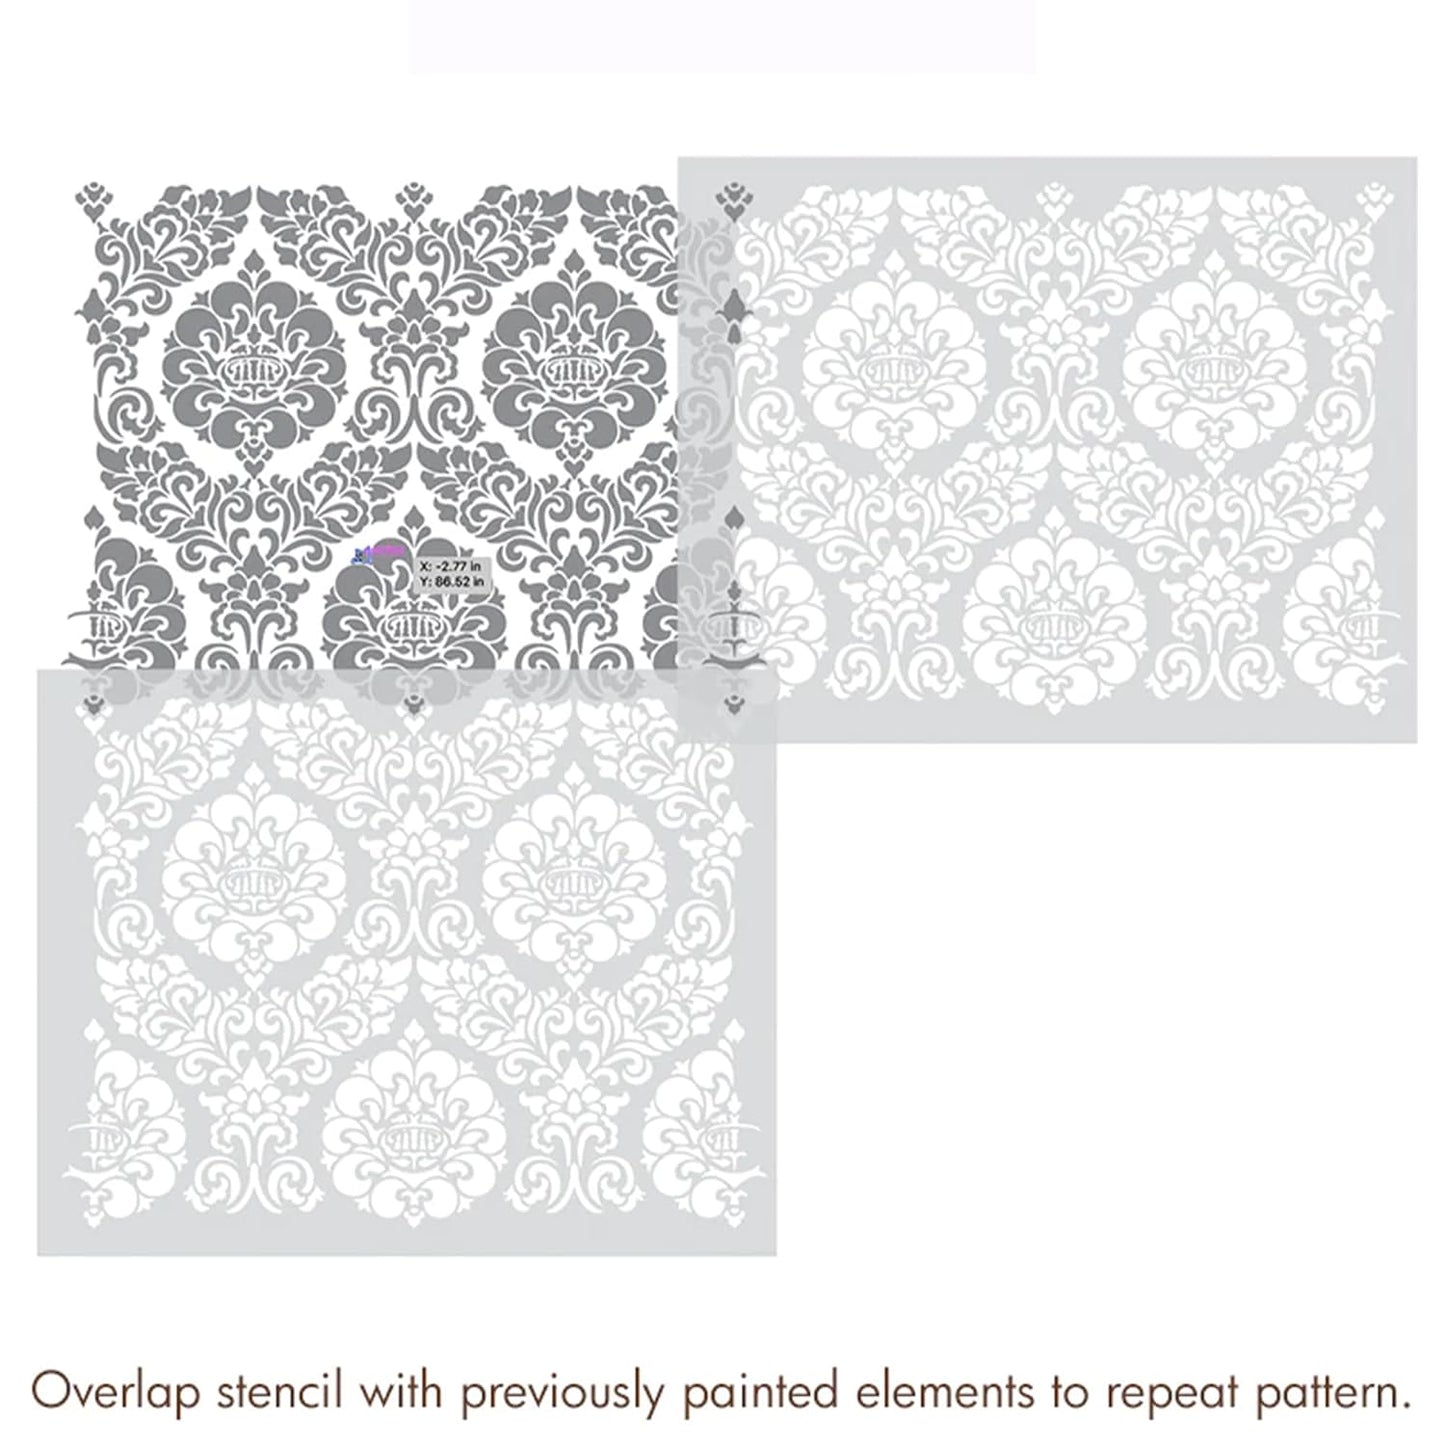 Latest Fidelity Damask Stencils for Wall Painting - Pack of 1, Sheet Size 24 x 30 inch/Design for Wall Painting 21 x 28 inch - Large